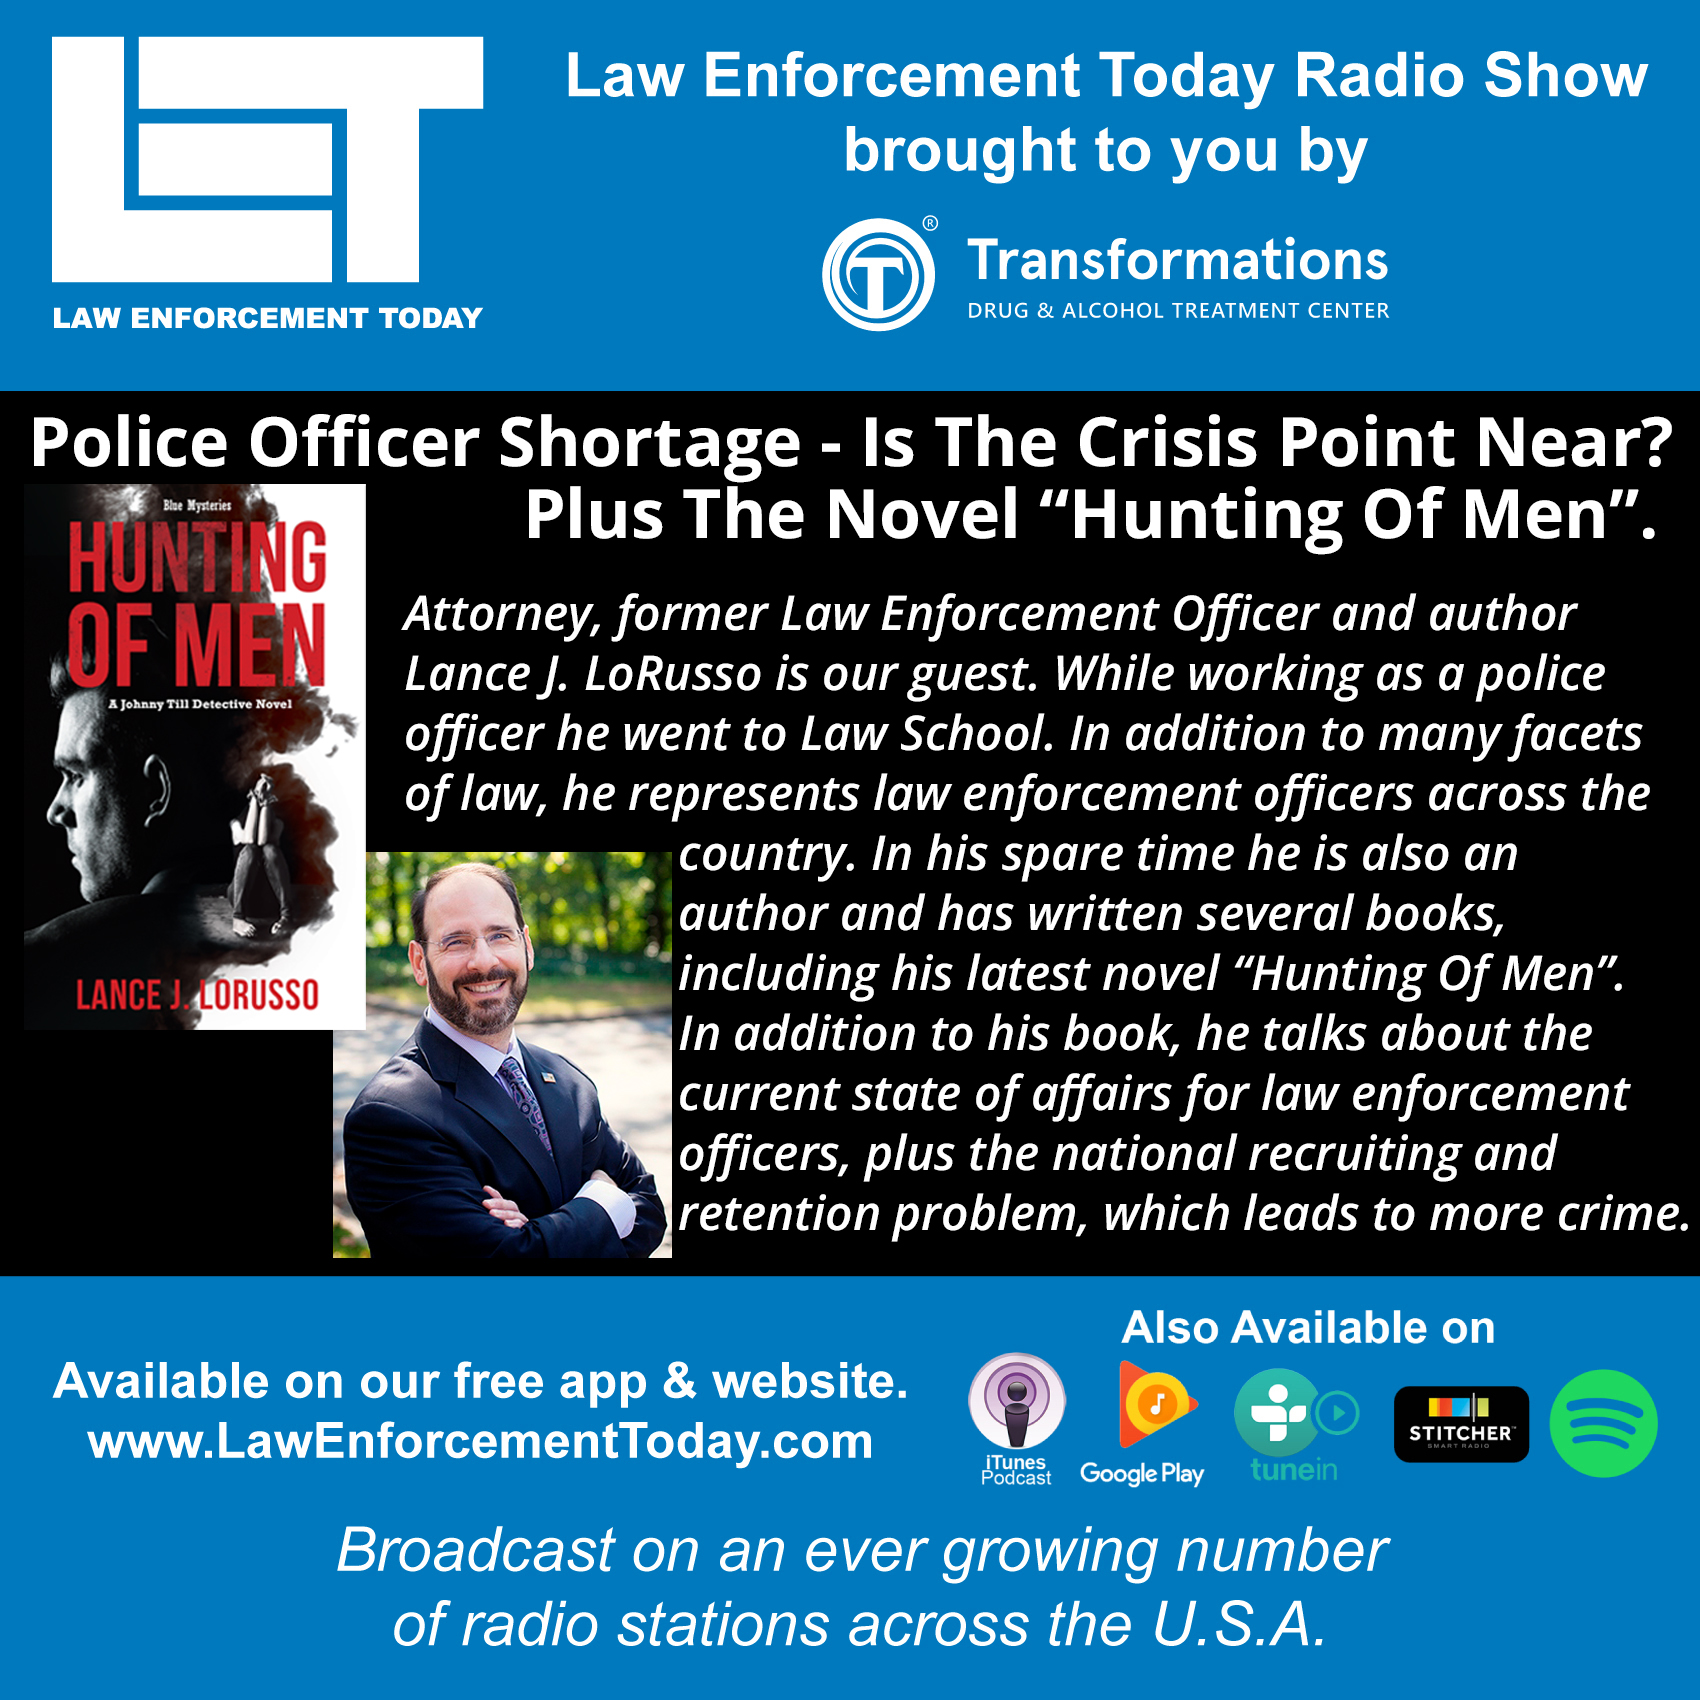 S4E11: Police Officer Shortage - Is The Crisis Point Near?